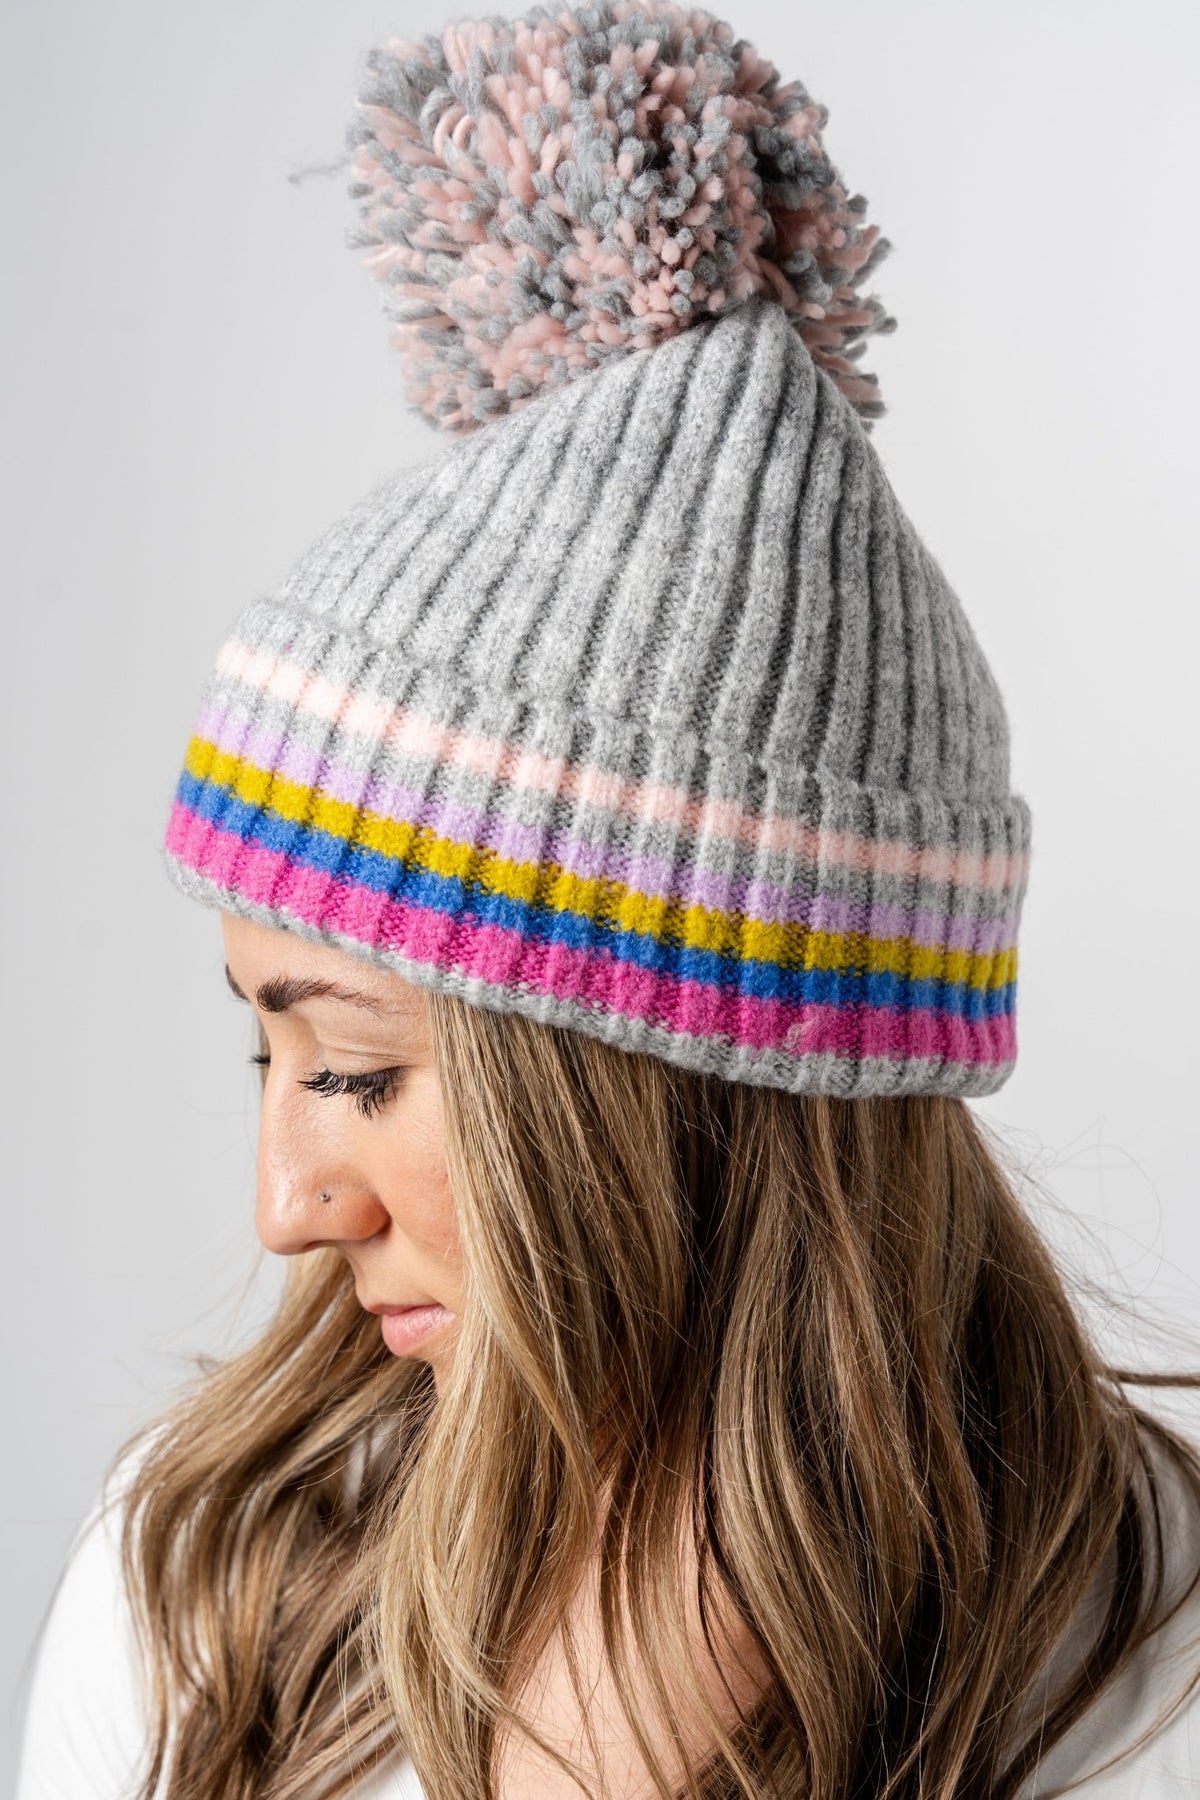 Ronen multi knit pom beanie grey - Trendy Gifts at Lush Fashion Lounge Boutique in Oklahoma City